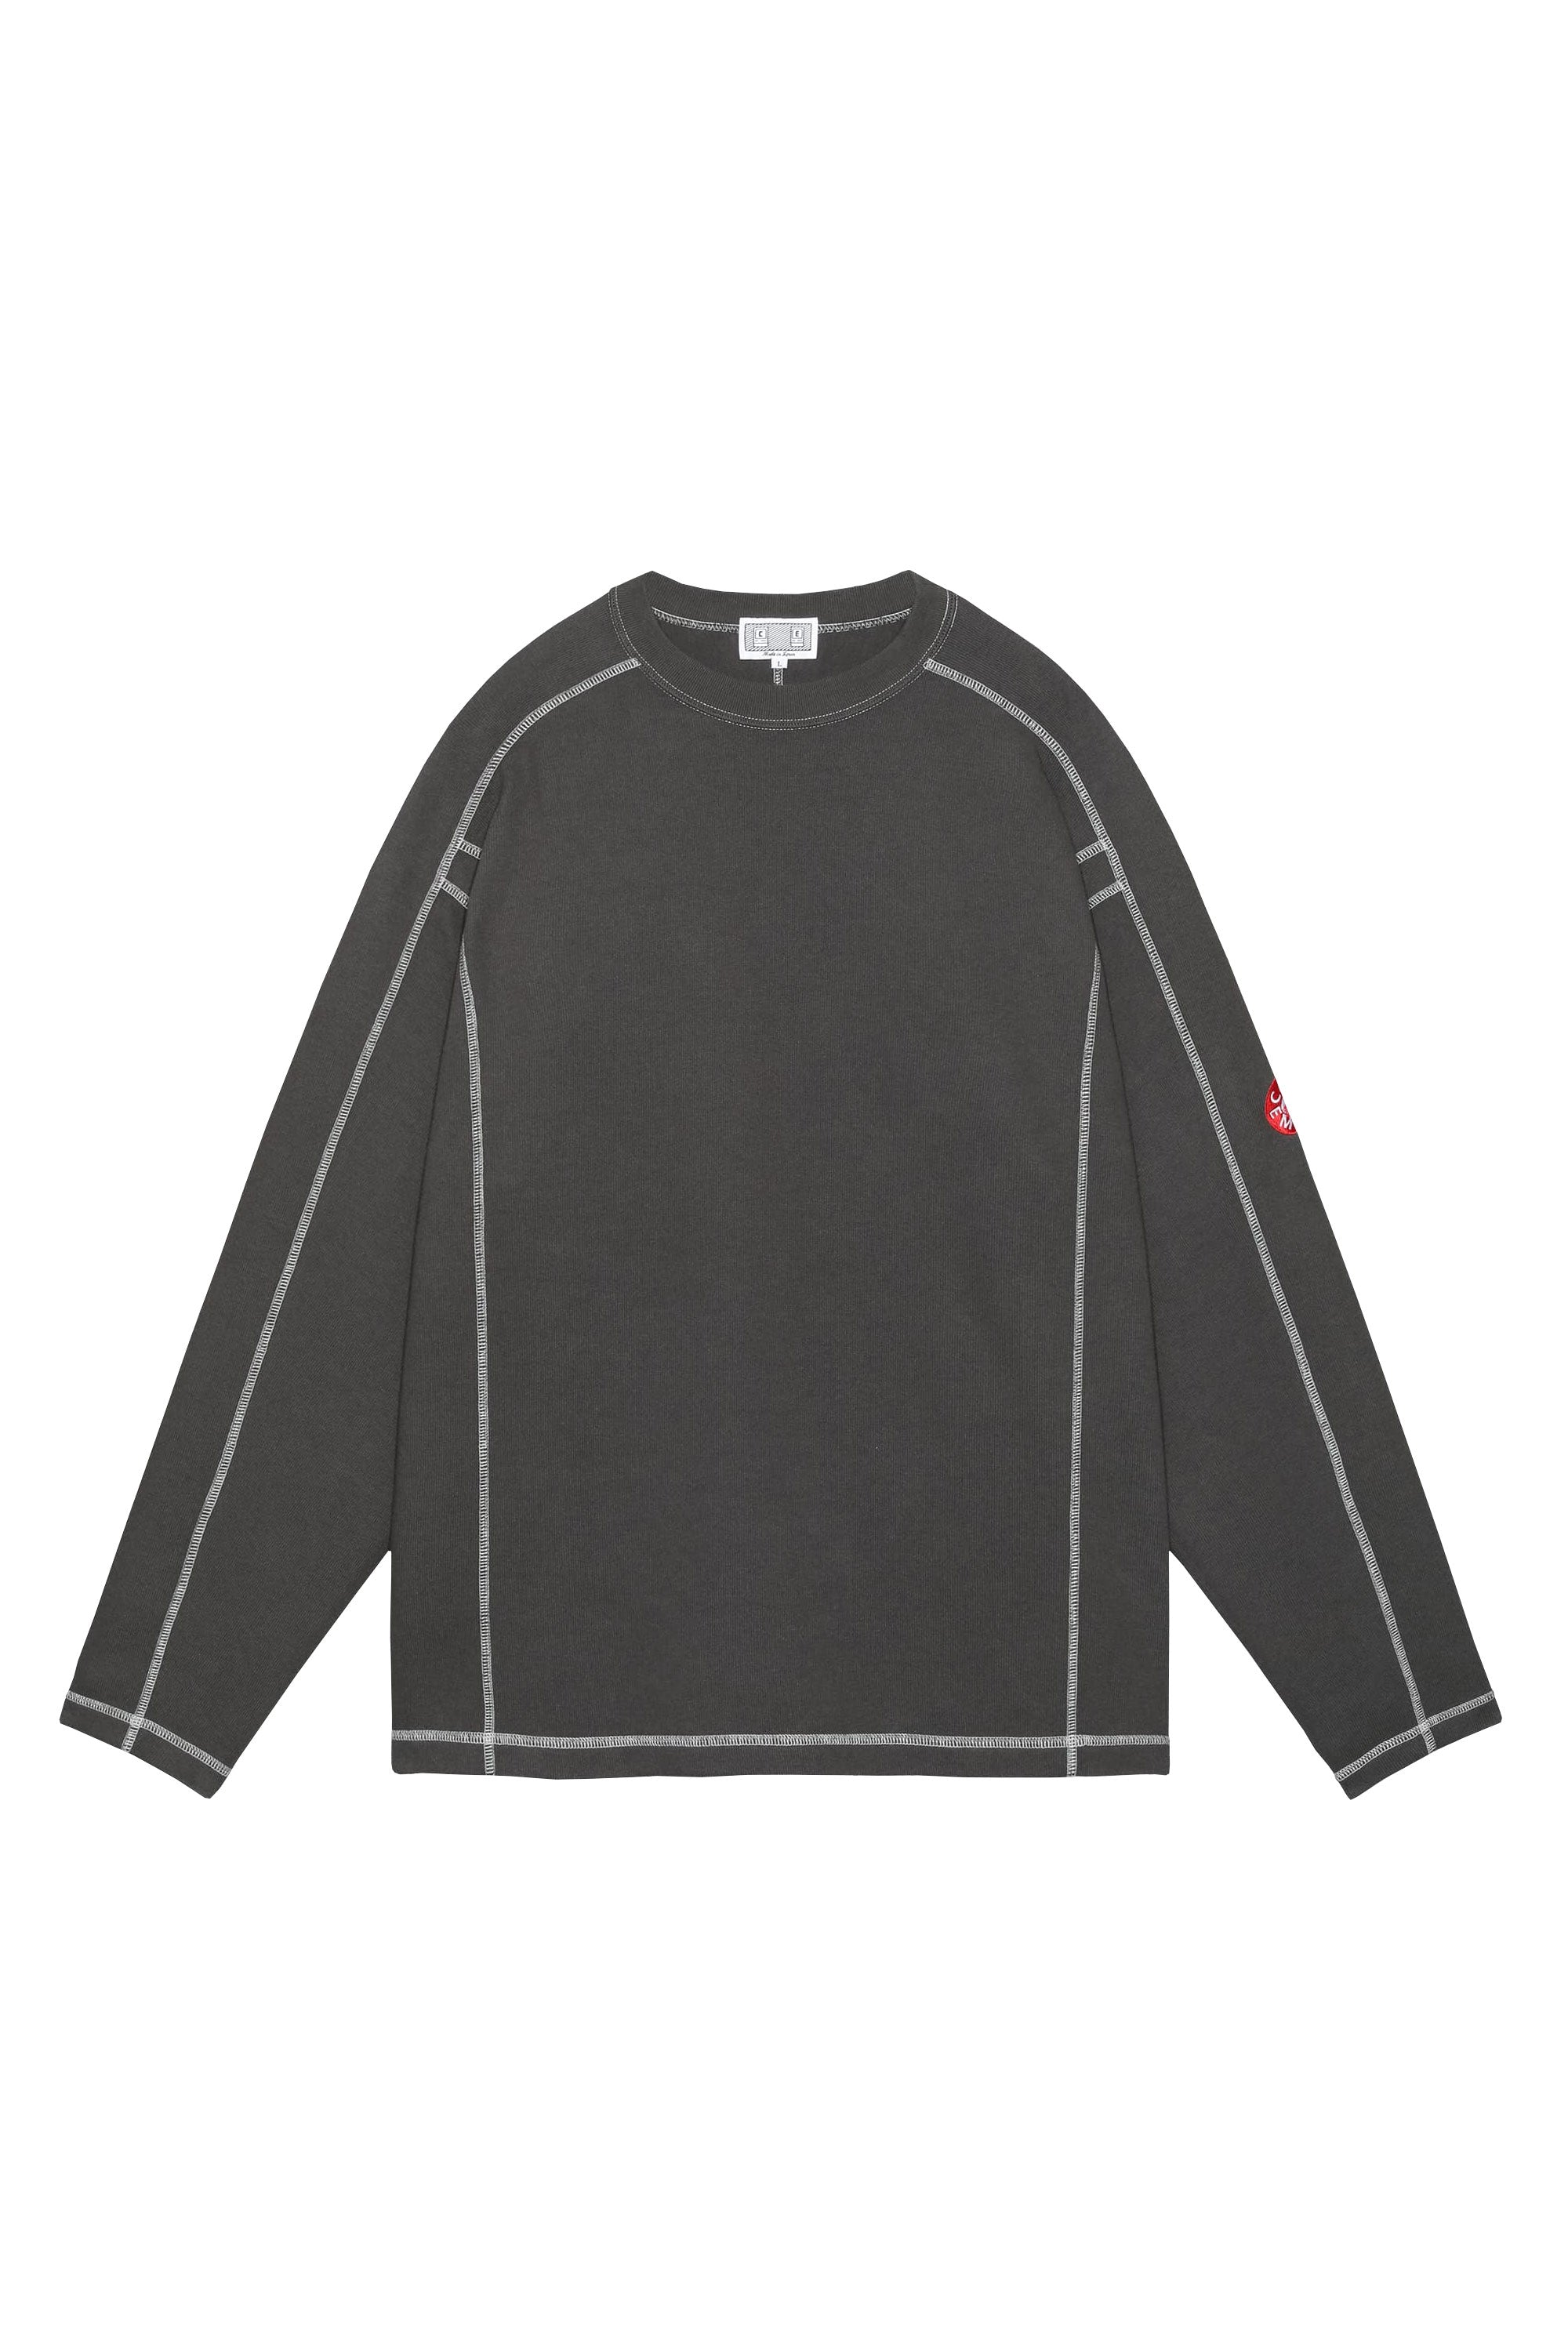 The CAV EMPT - CREW NECK DBL KNIT LONG SLEEVE  available online with global shipping, and in PAM Stores Melbourne and Sydney.